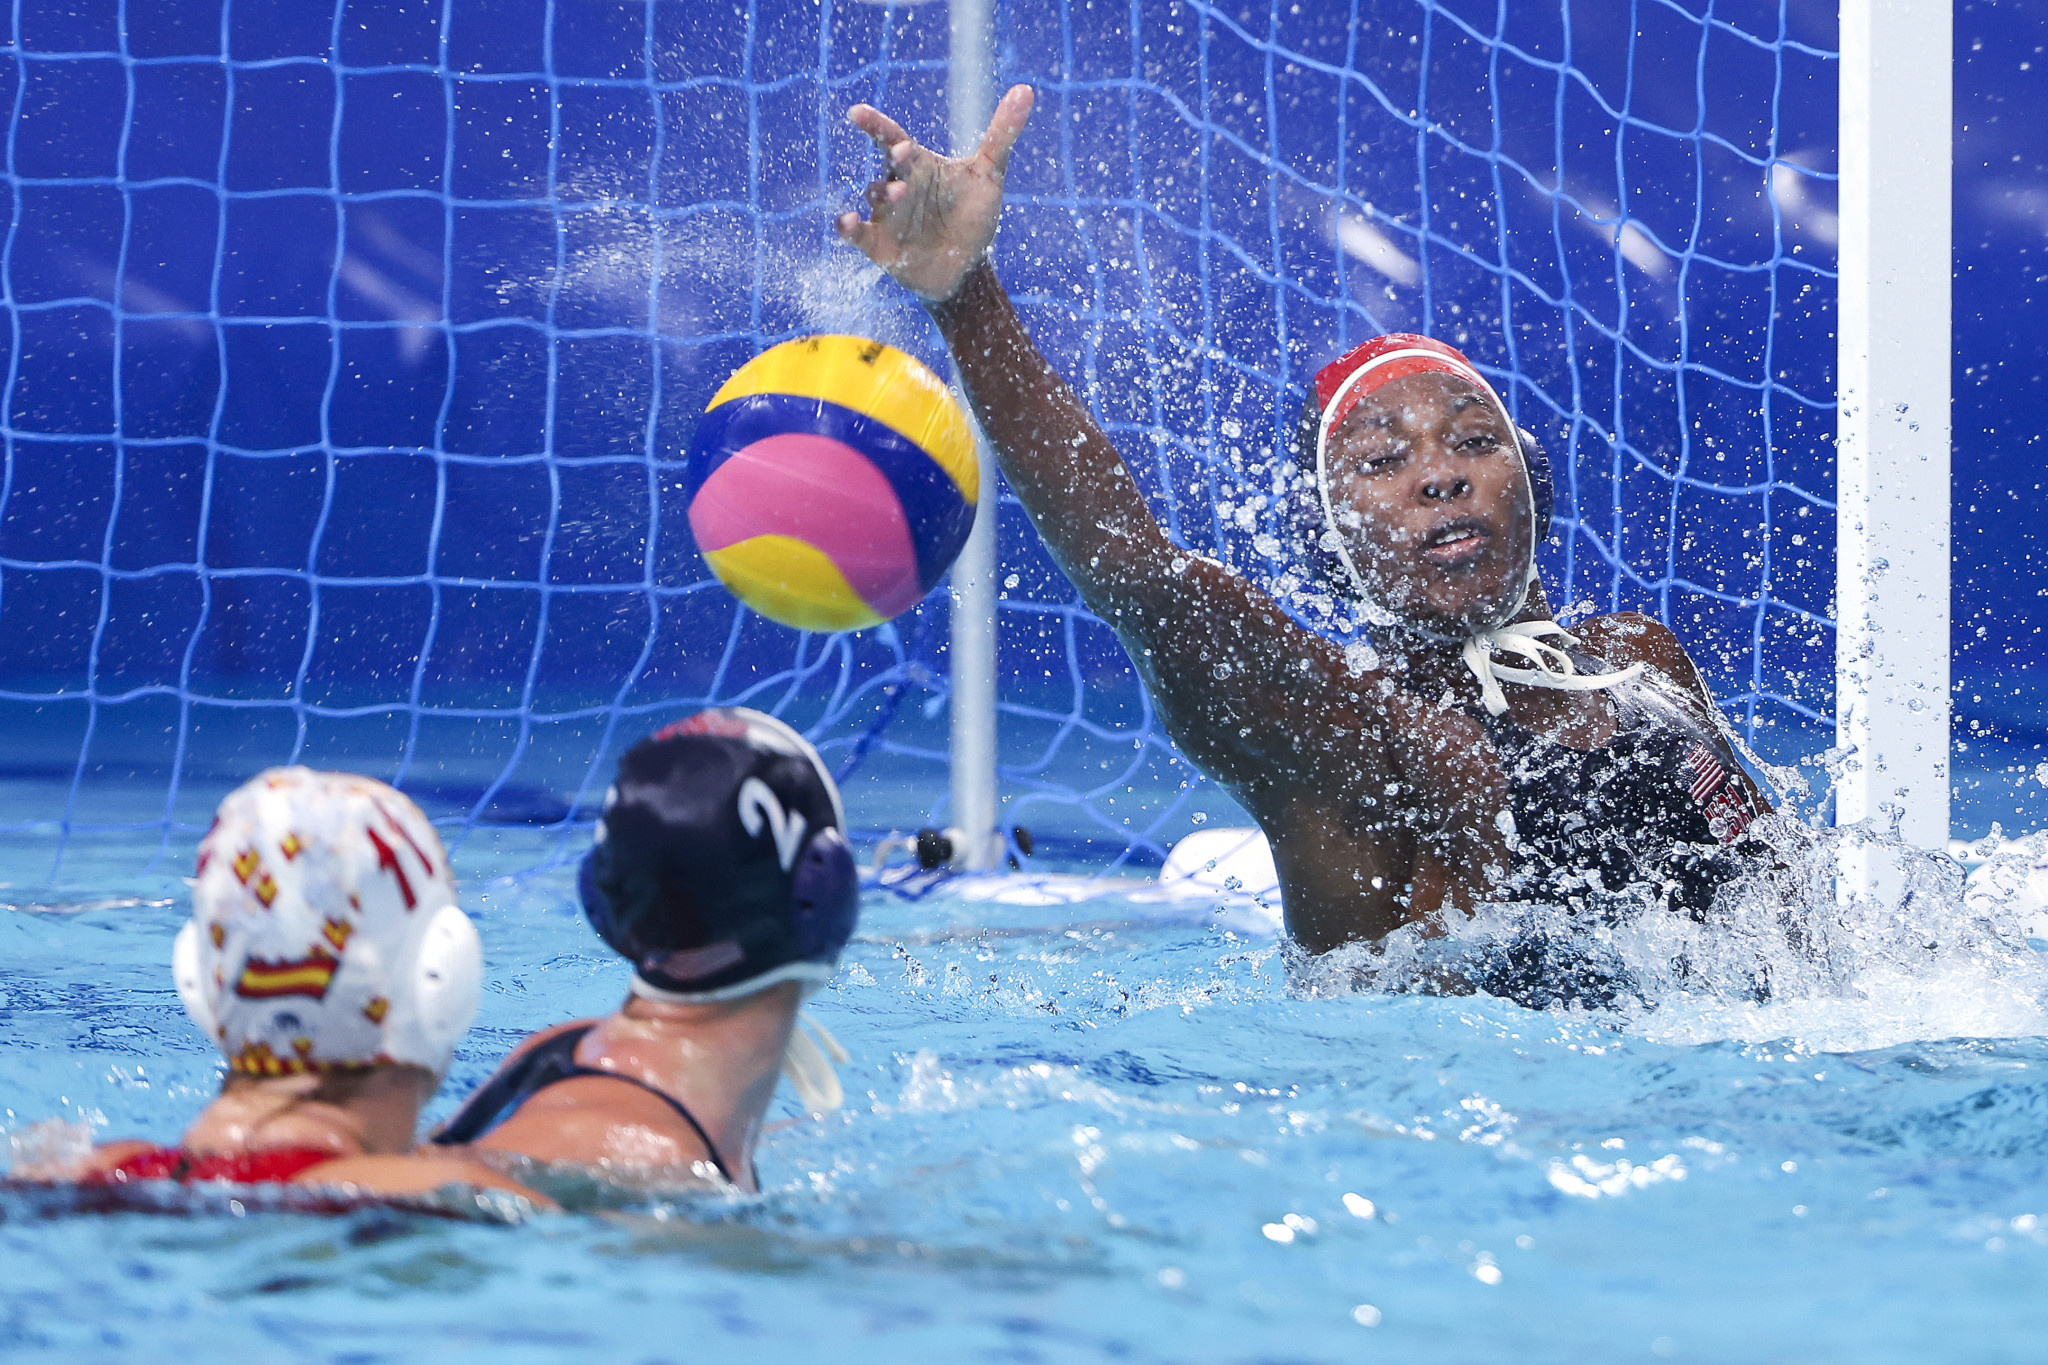 Water Polo: The USA vs. Spain, Women's division at the 2020 Tokyo Summer Olympic Games. 2050x1370 HD Background.